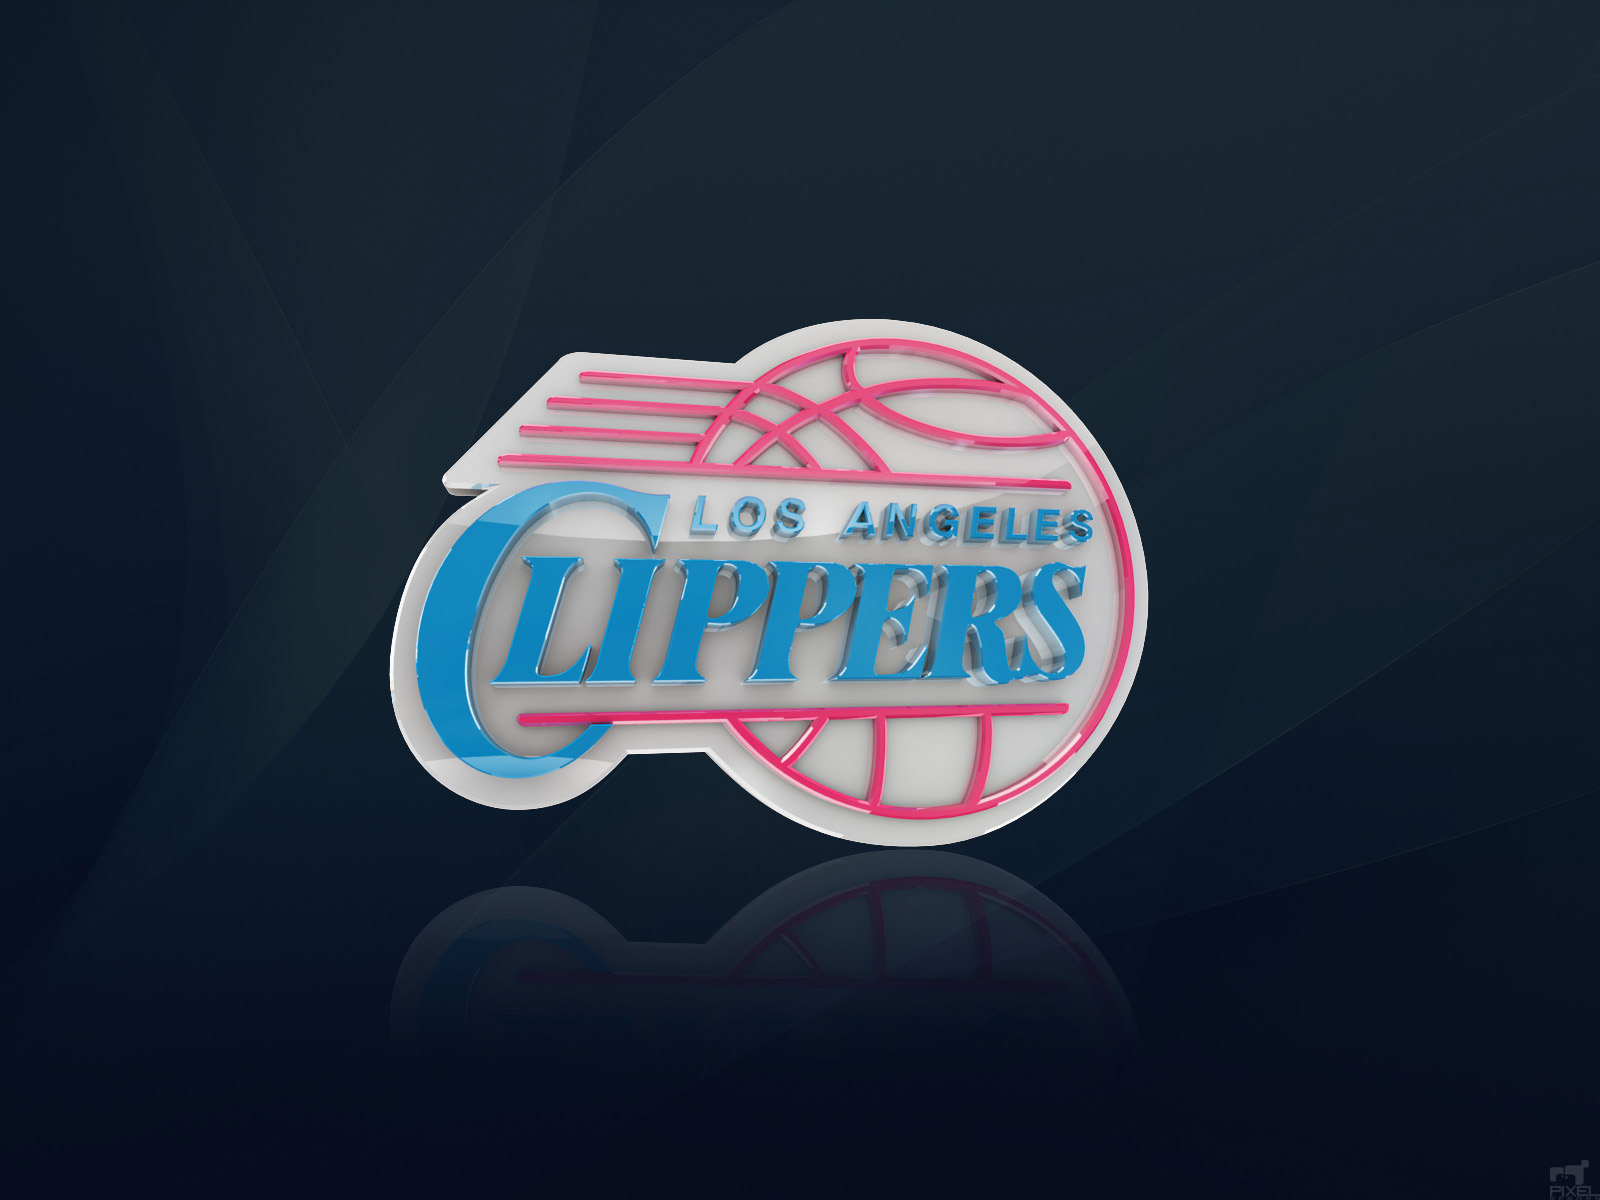 LOS ANGELES CLIPPERS - Basketball Wallpapers